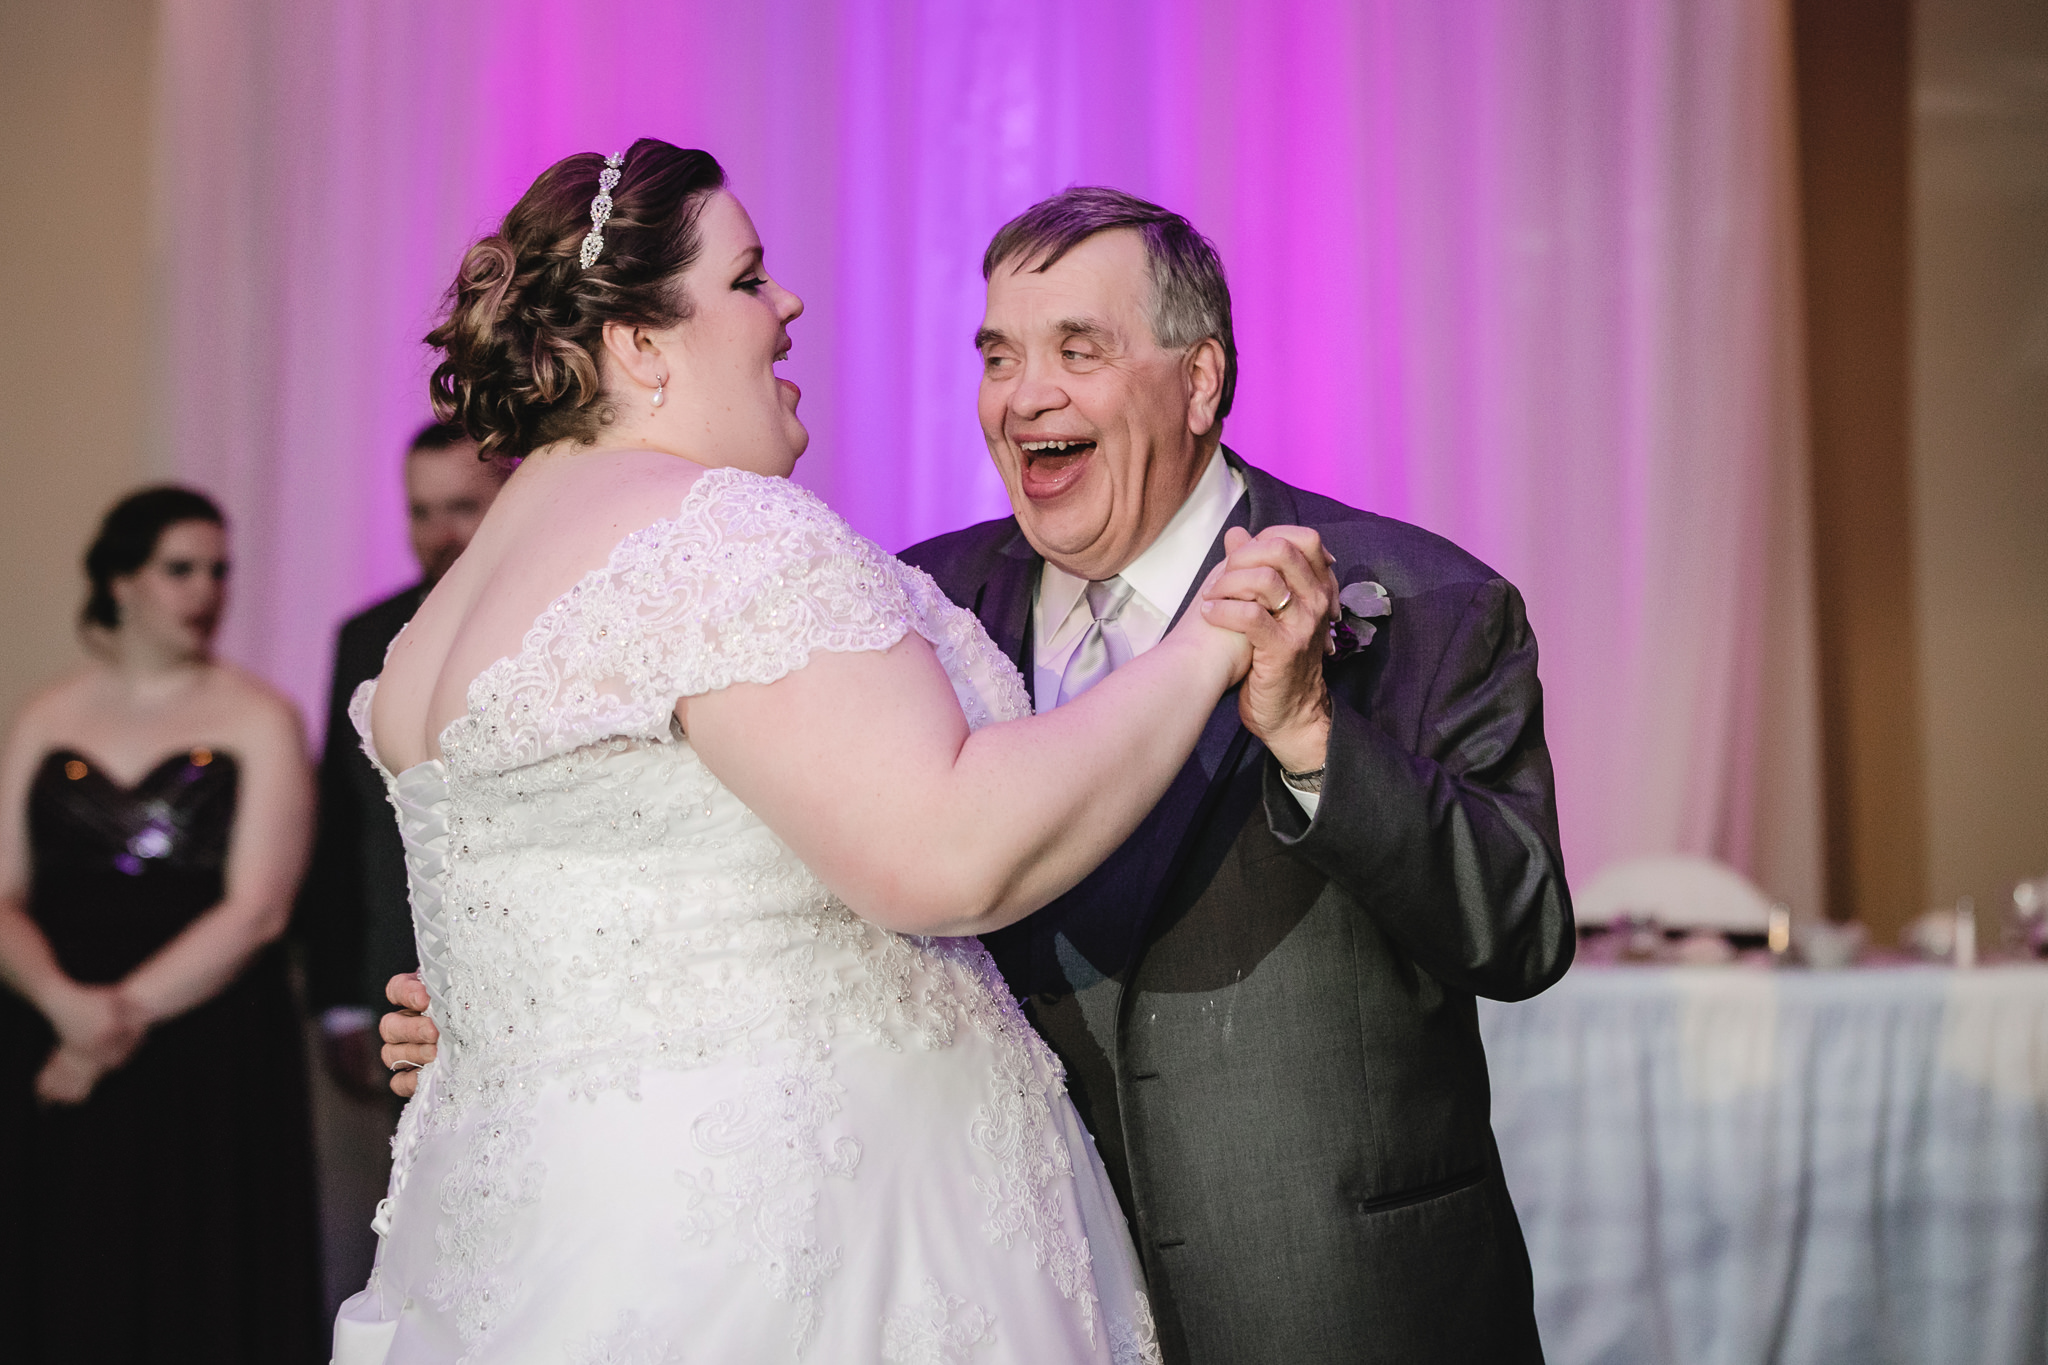 Father daughter dance at at wedding at the Fez